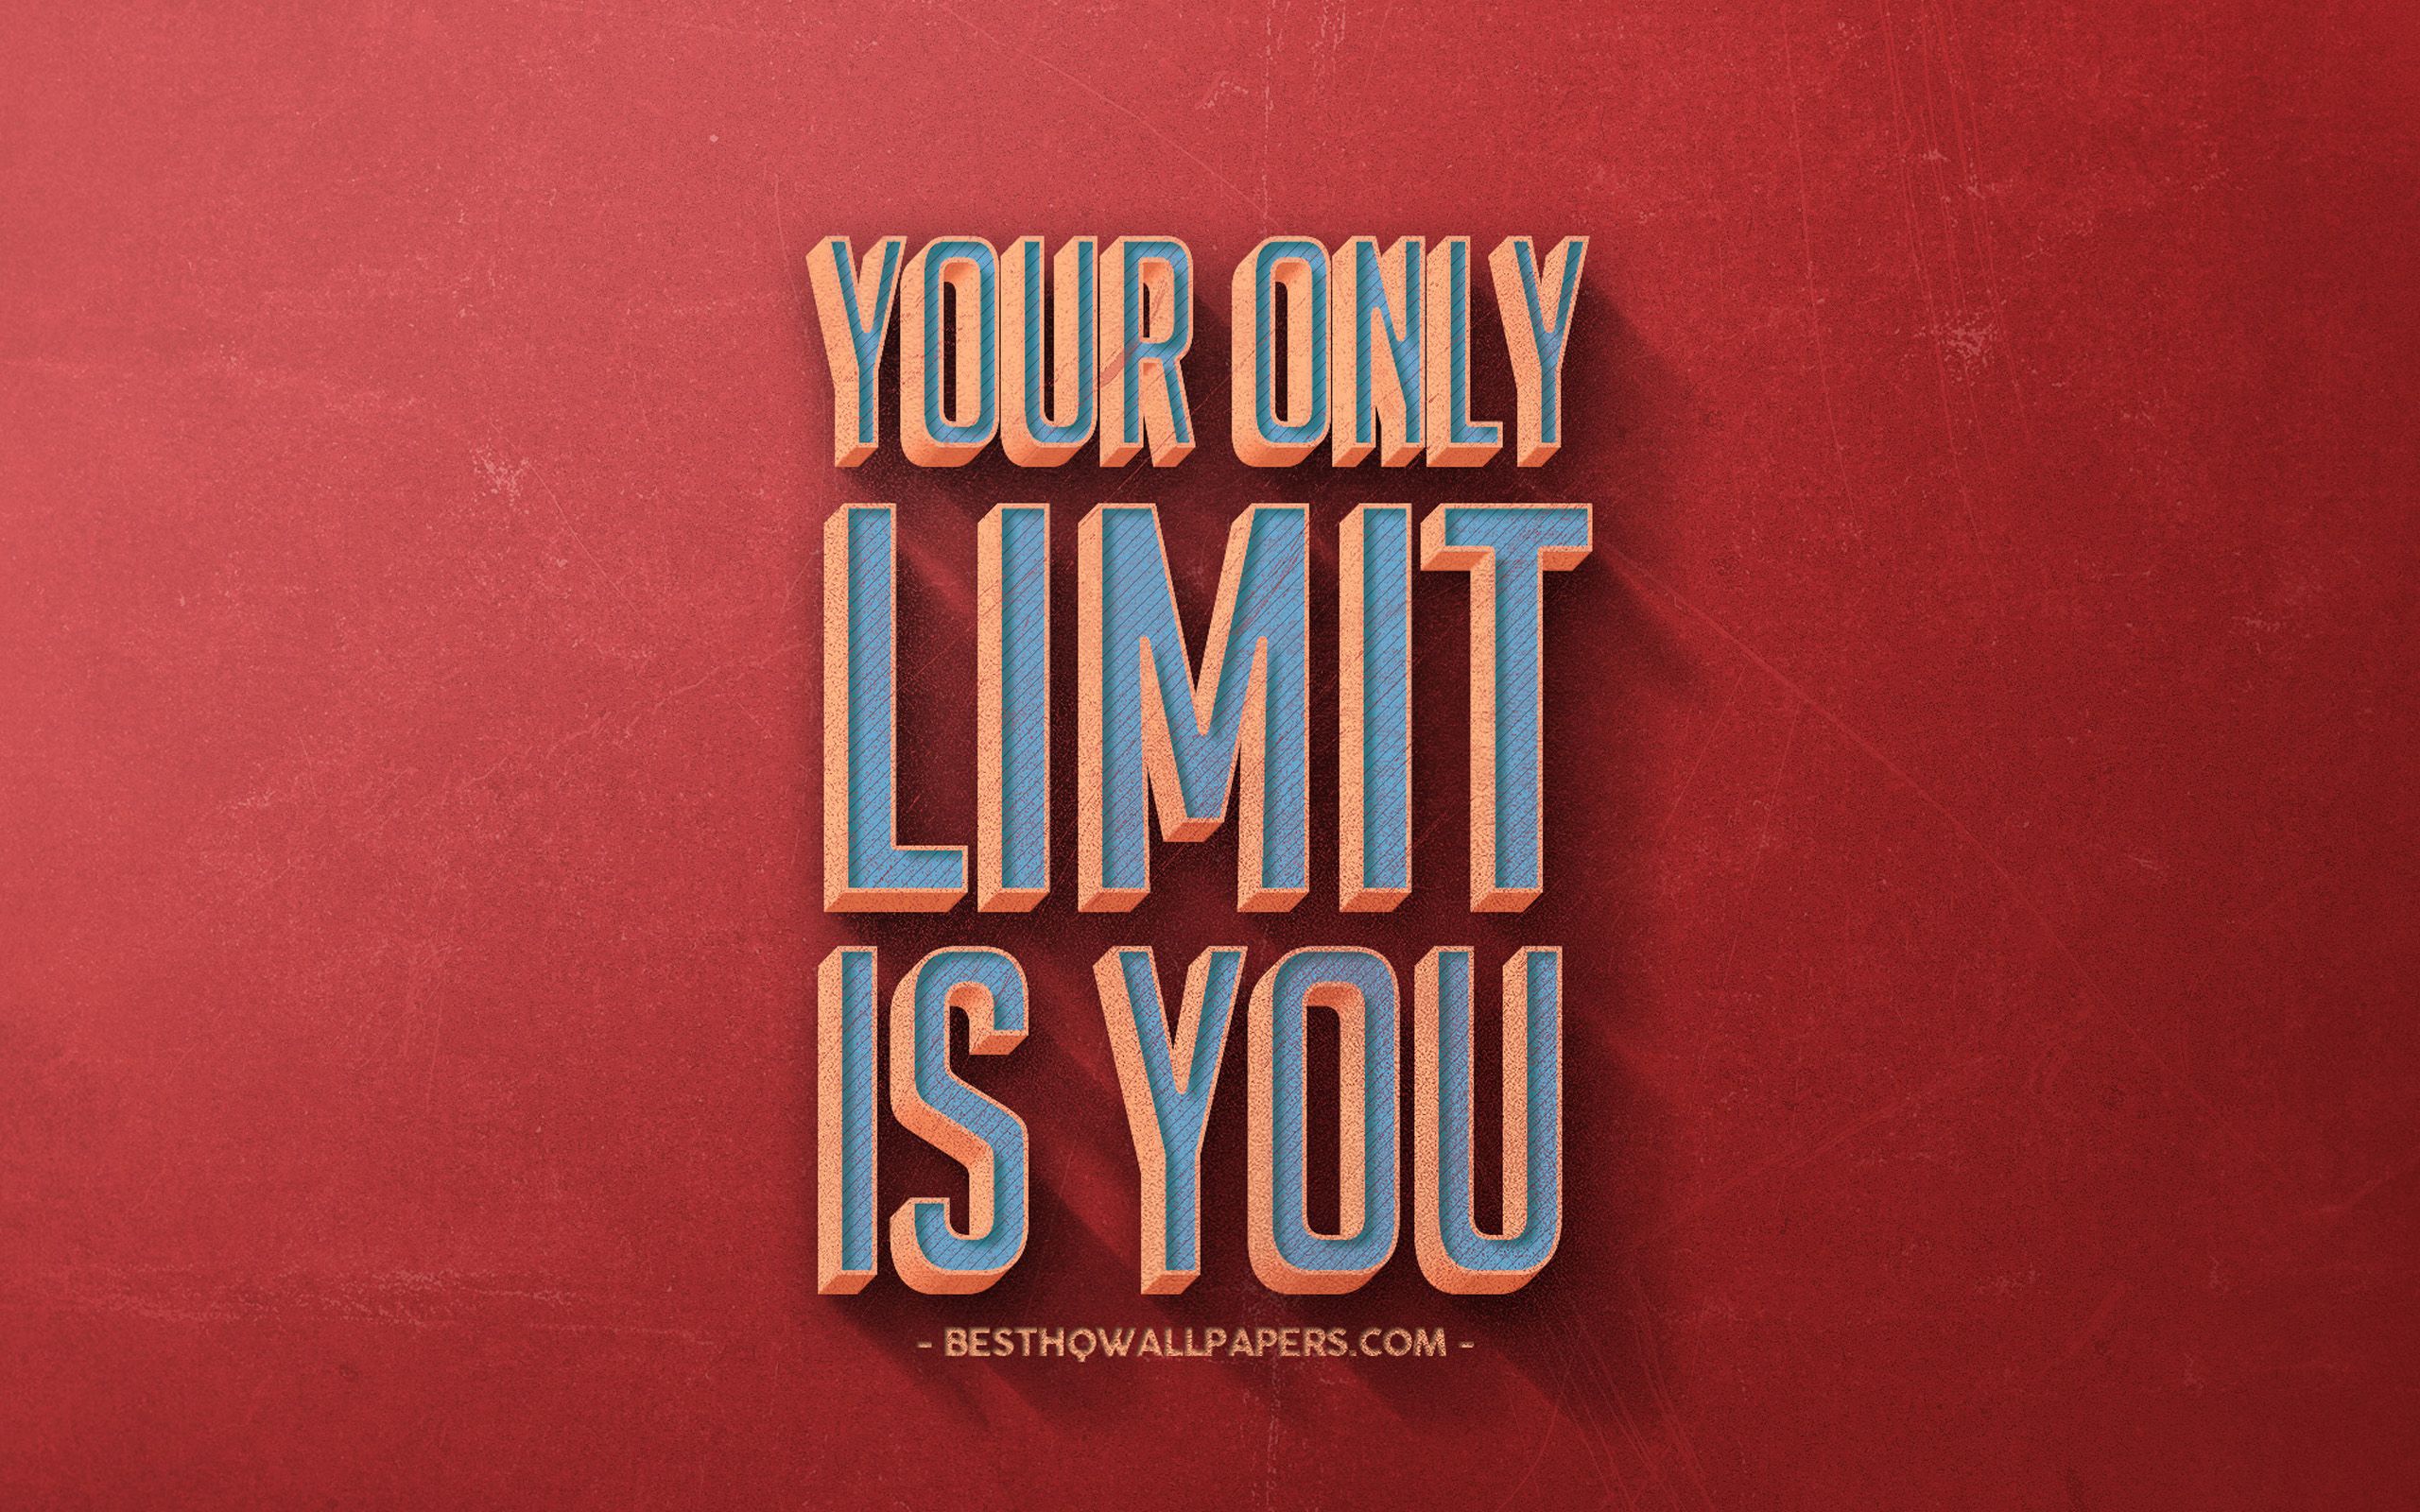 Download wallpaper Your only limit is you, inspiration, popular quotes, retro red background, retro style, creative art for desktop with resolution 2560x1600. High Quality HD picture wallpaper